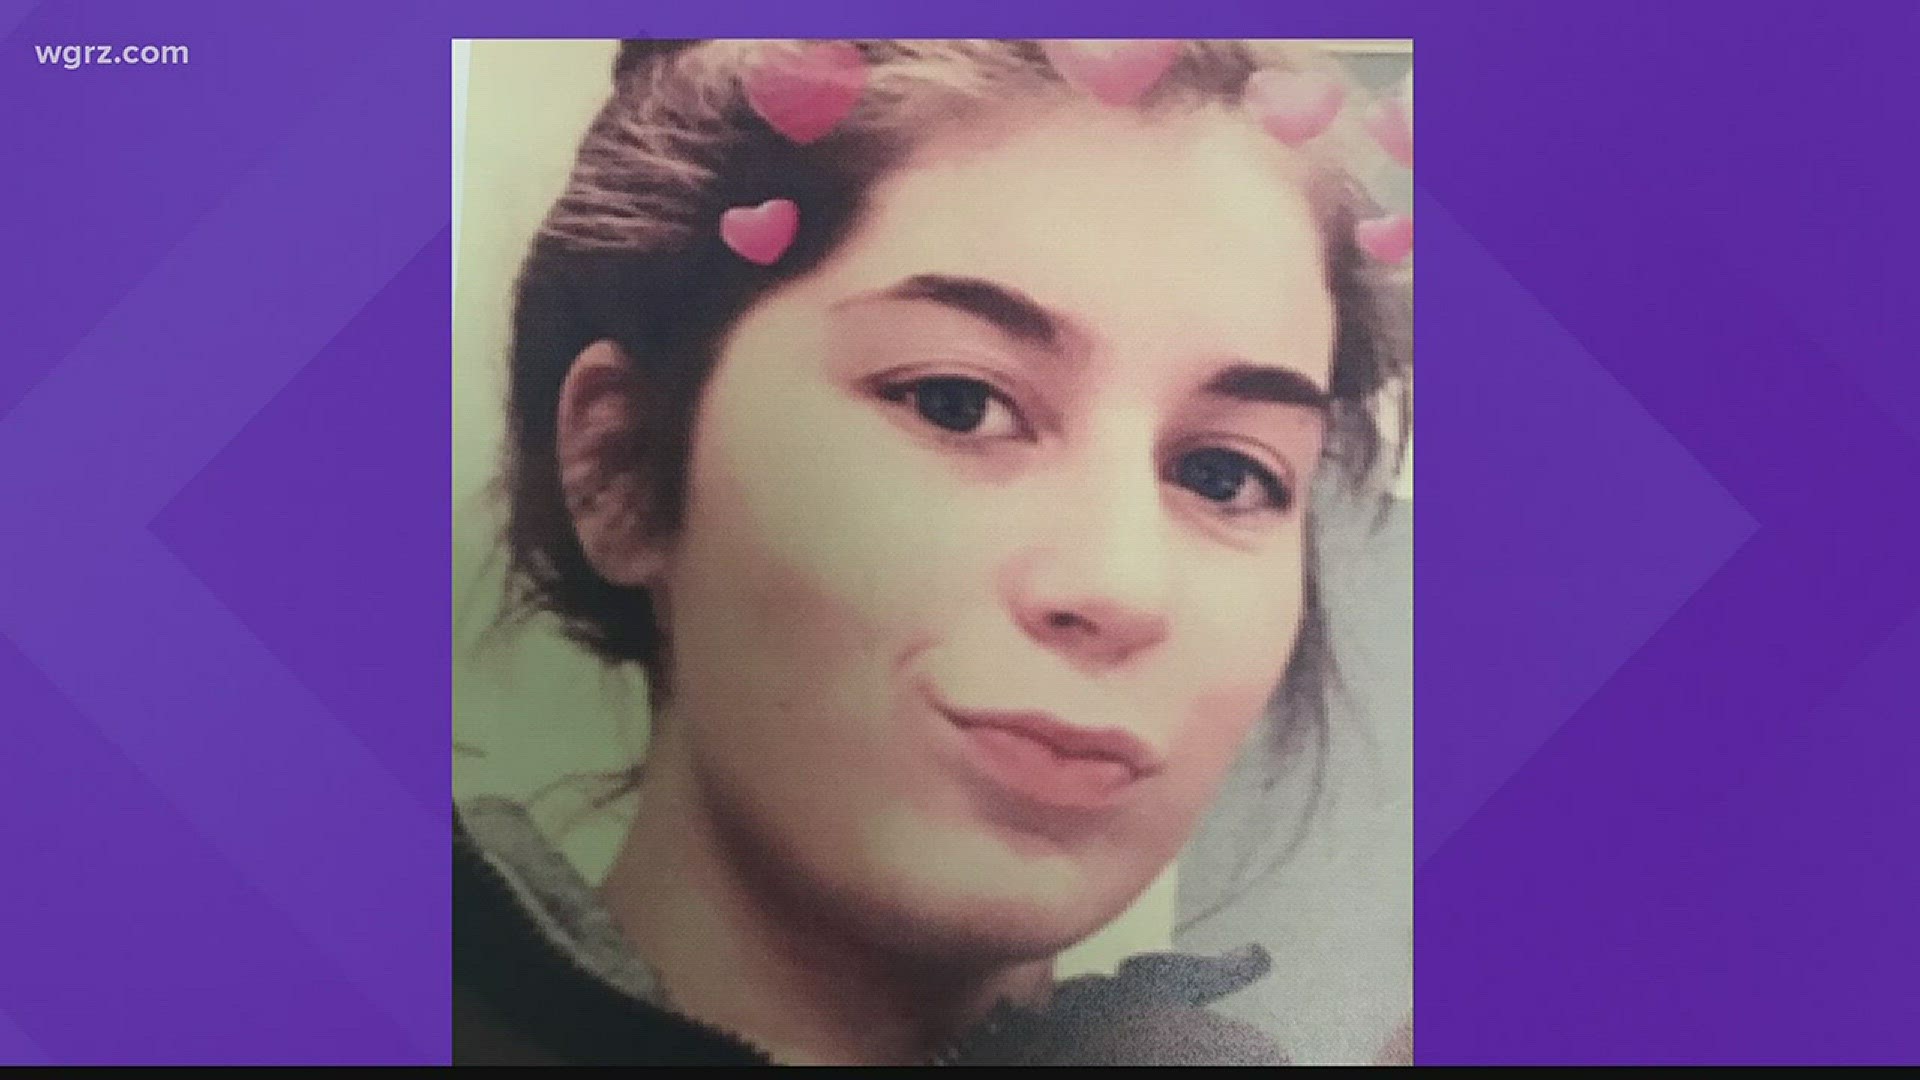 City Of Ton. PD Looking For Missing Teen